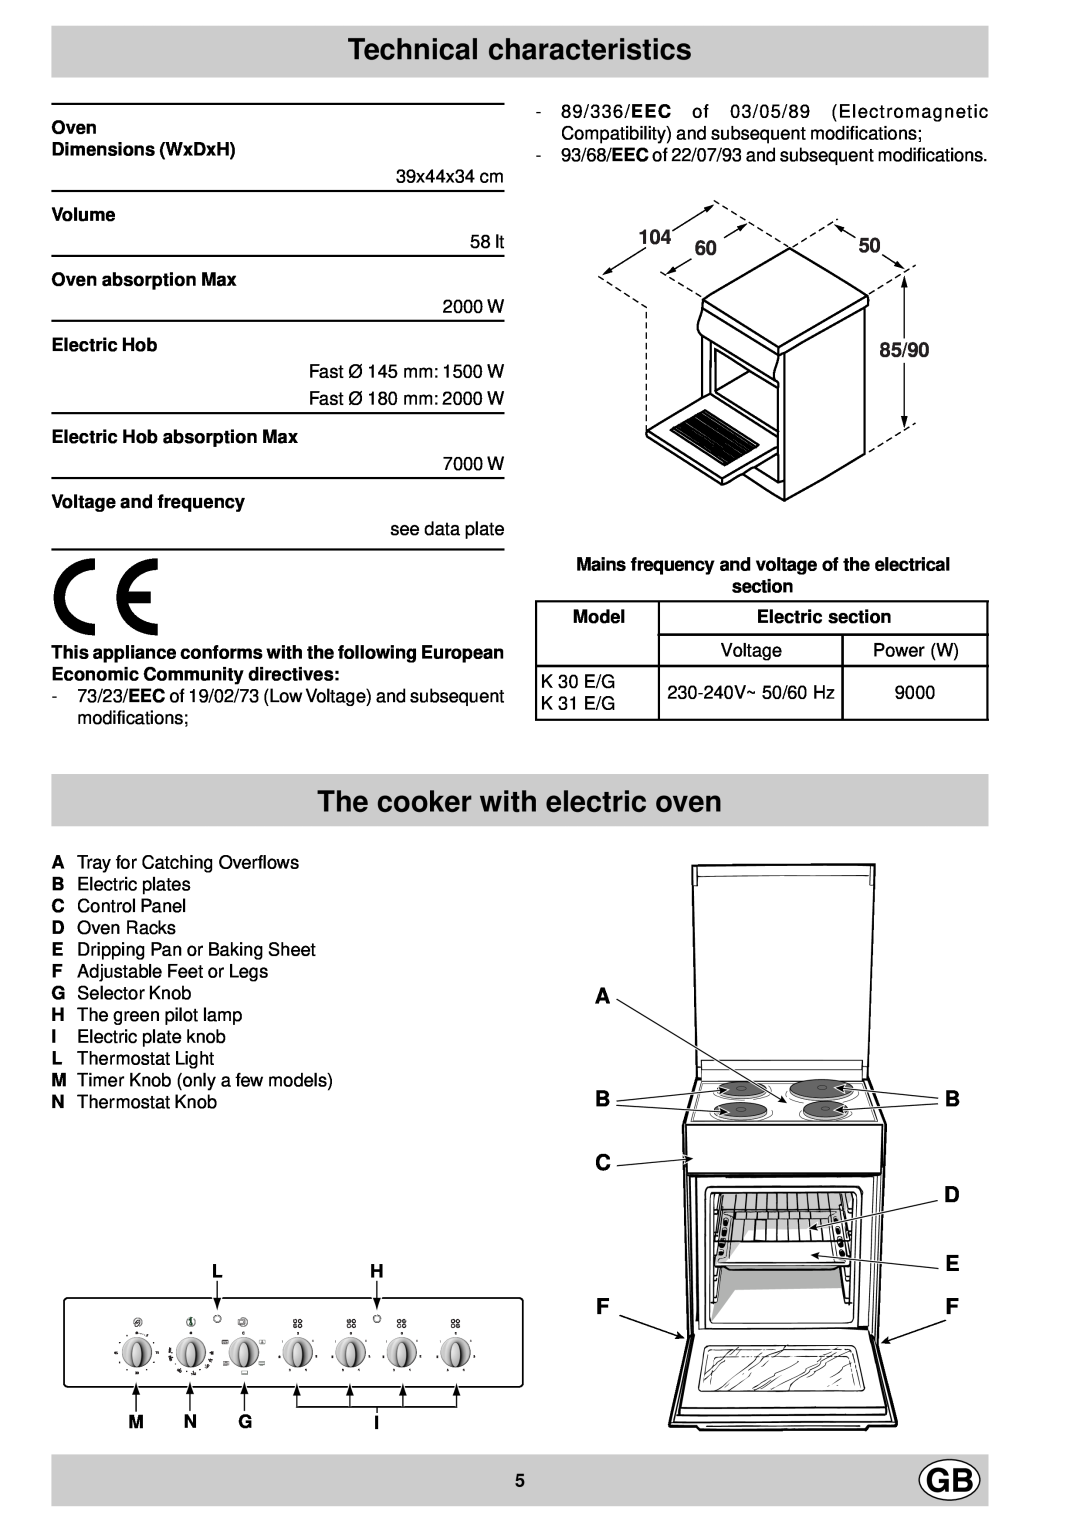 Indesit K 30 E/G Technical characteristics, The cooker with electric oven, A B B C, Oven Dimensions WxDxH, Volume, Model 